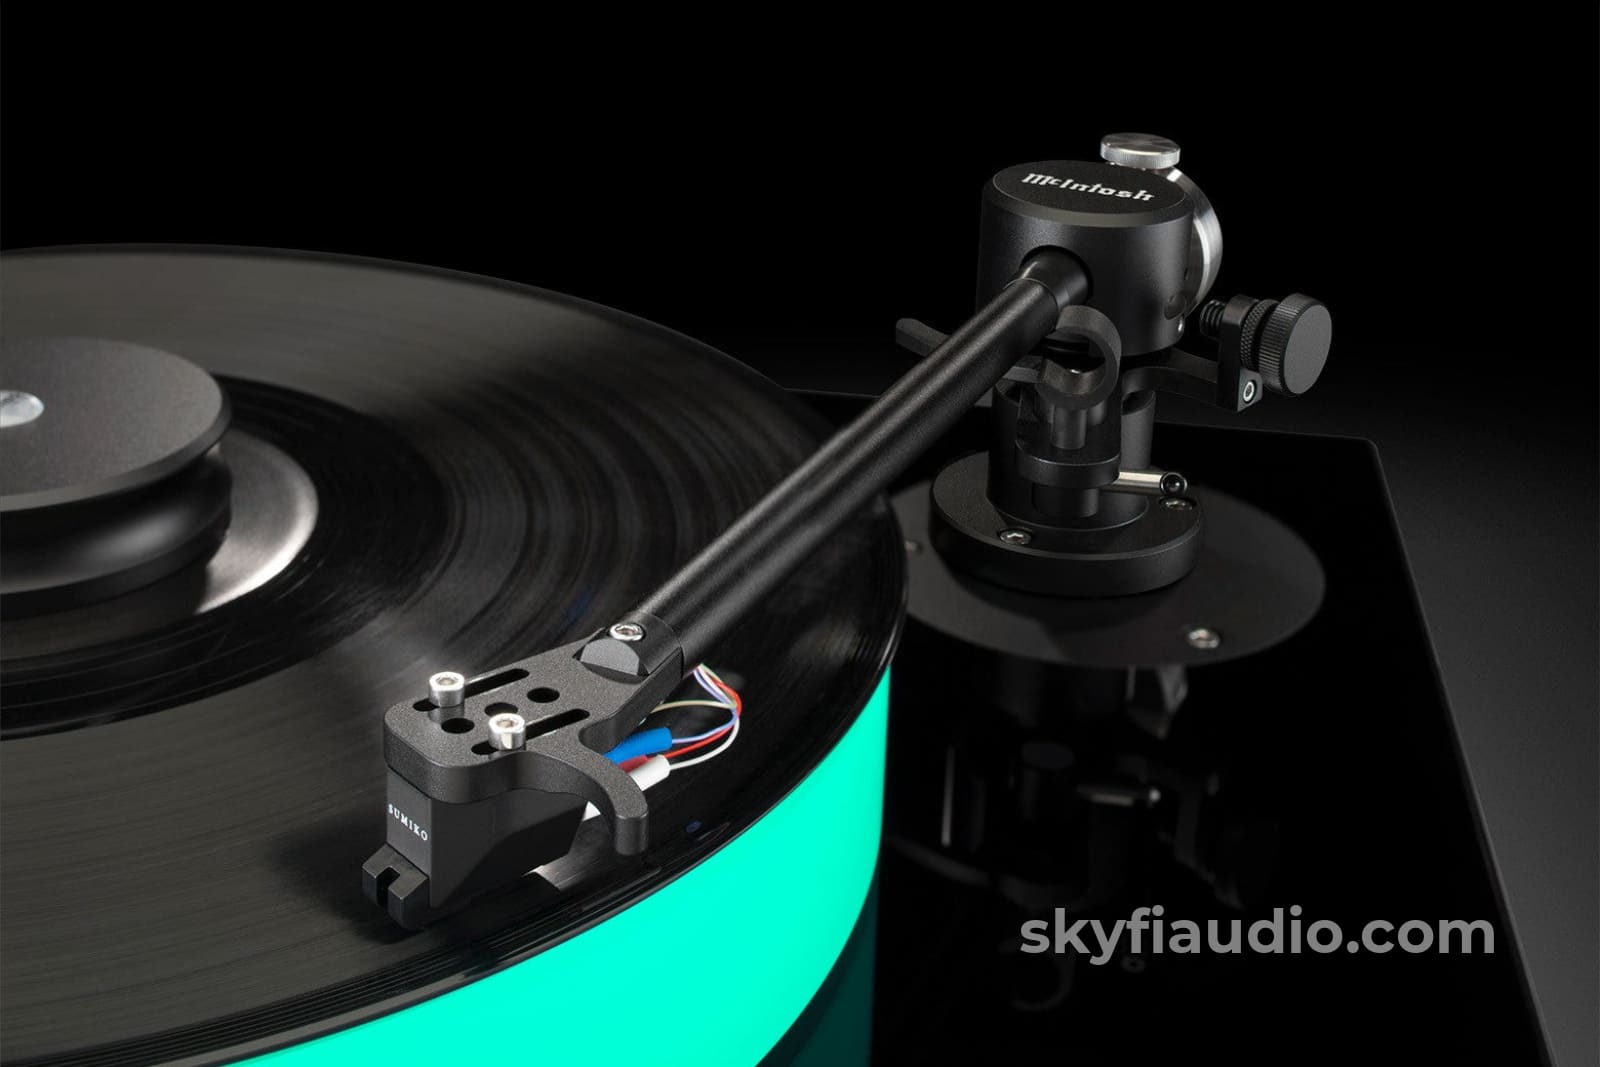 Mcintosh Mt5 Precision Turntable With Sumiko Cartridge - New